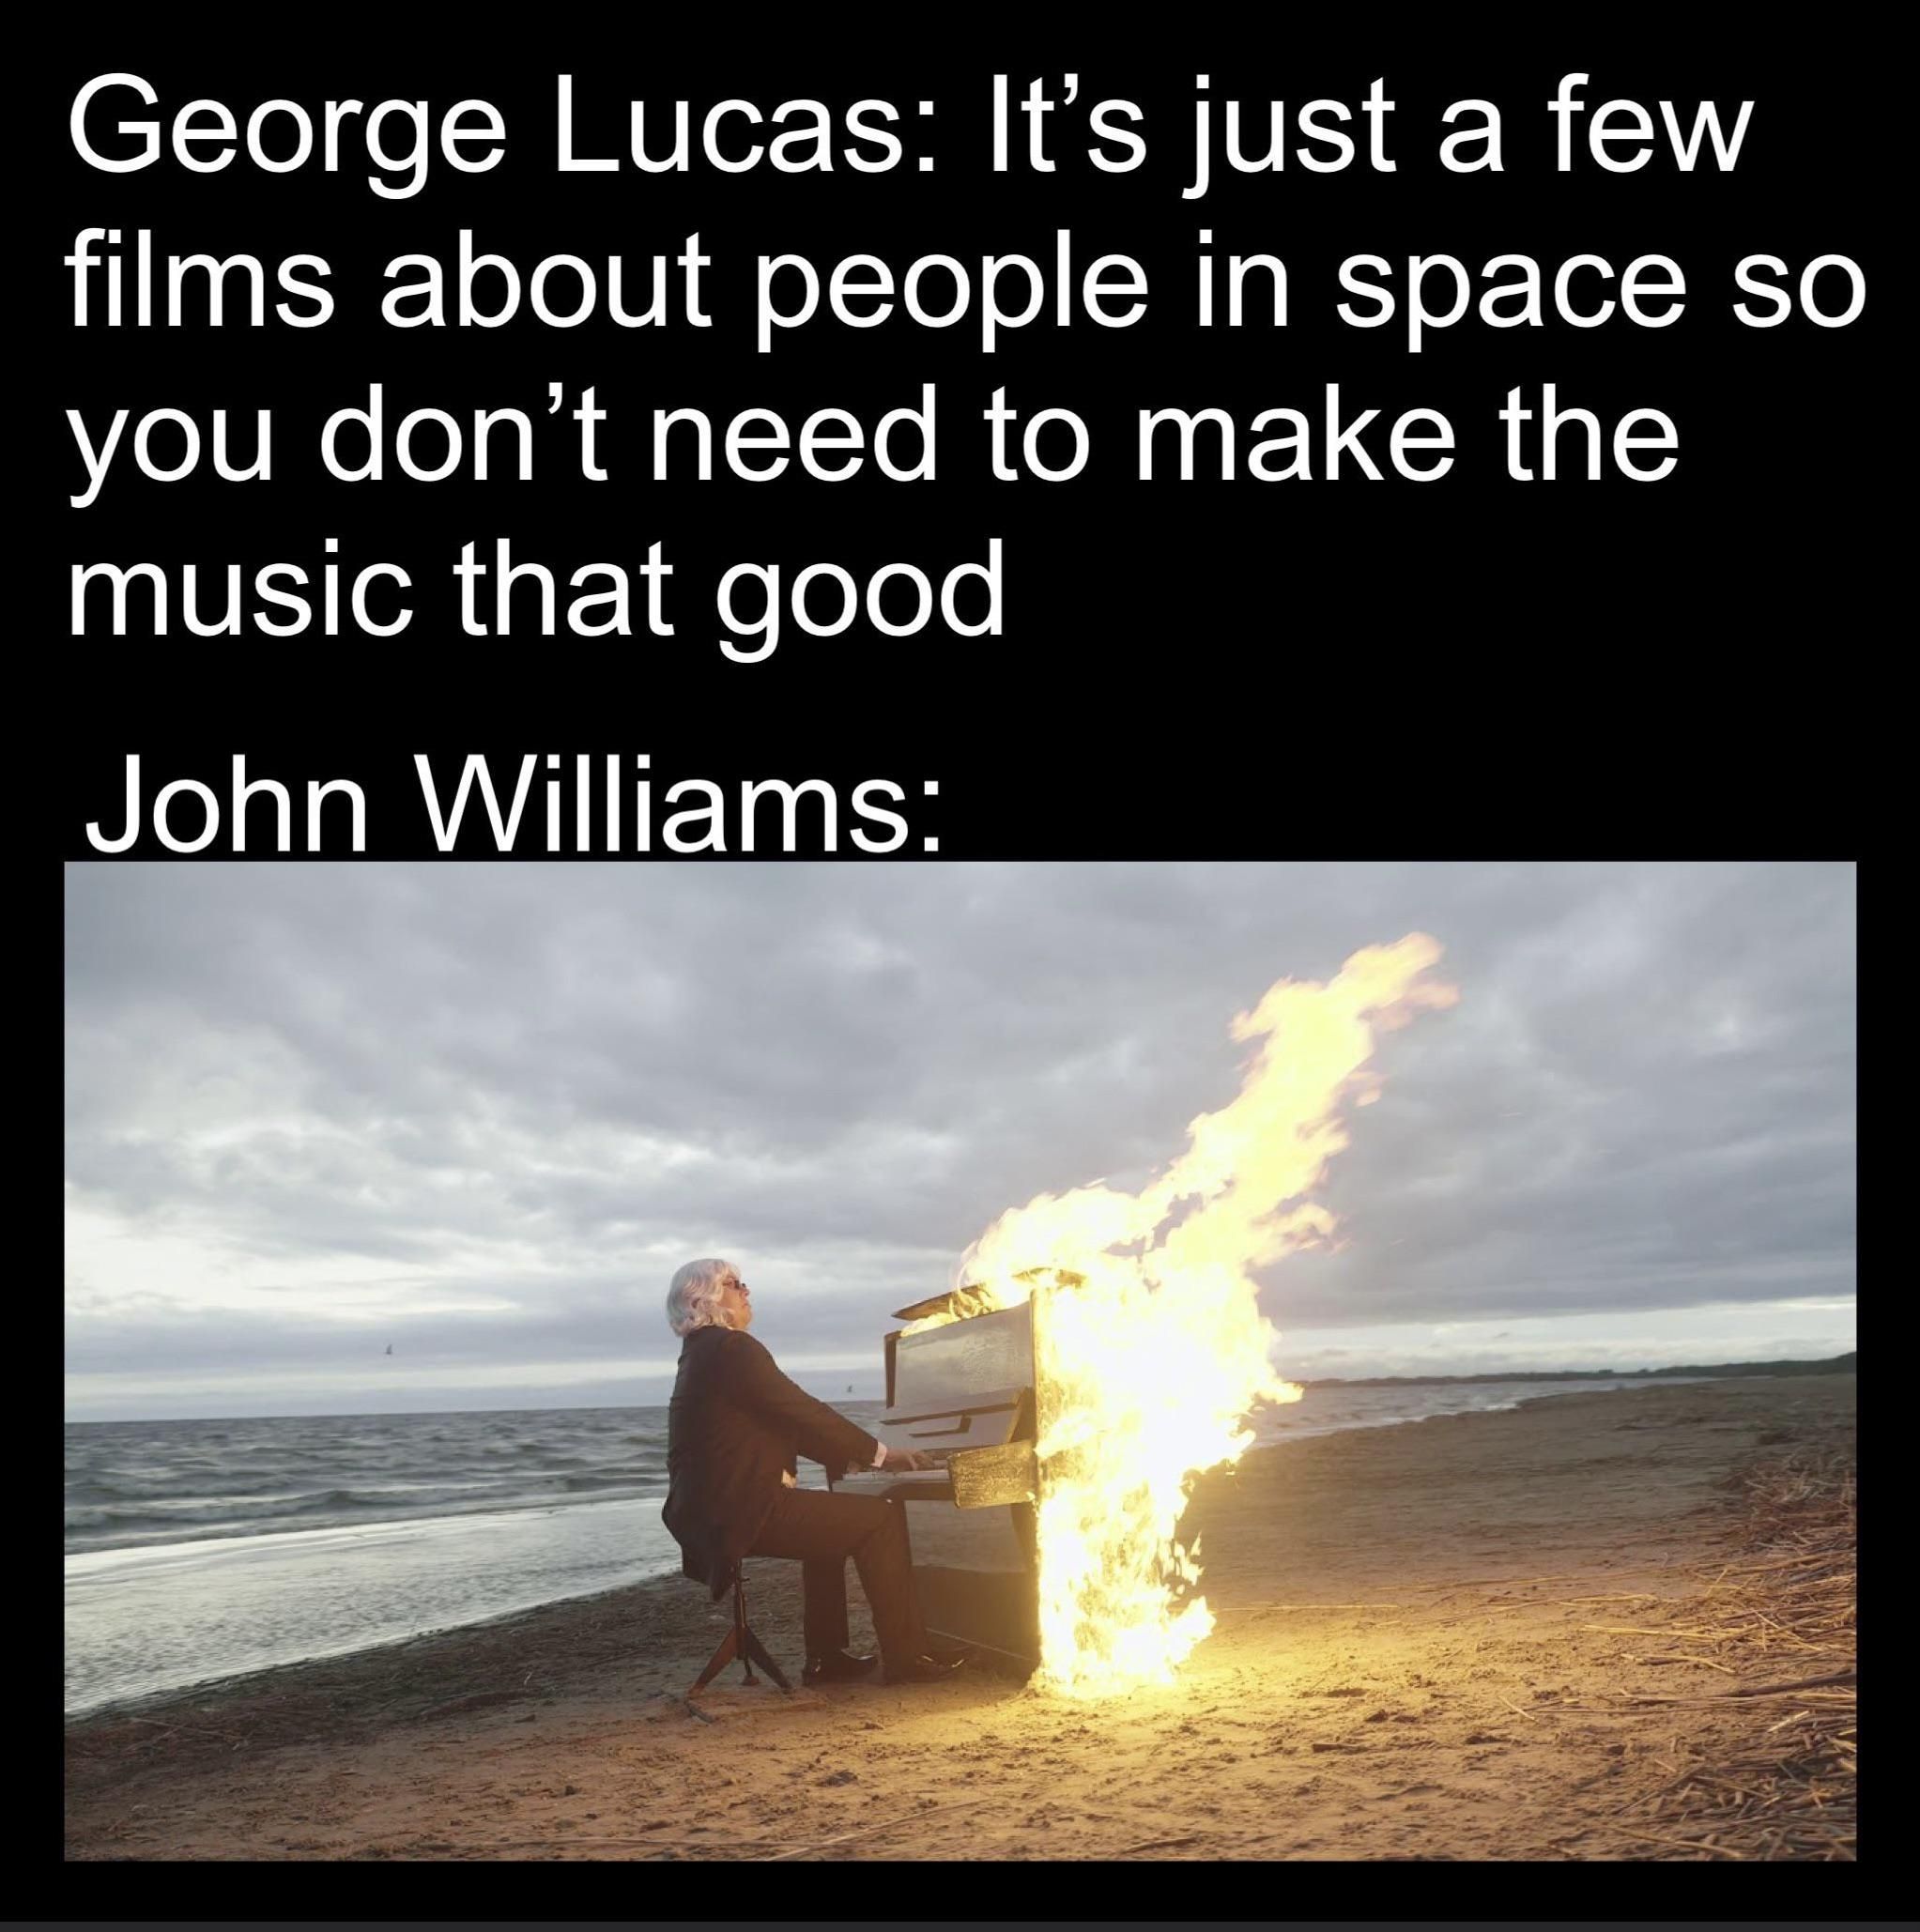 John Williams brings the heat no matter the occasion.